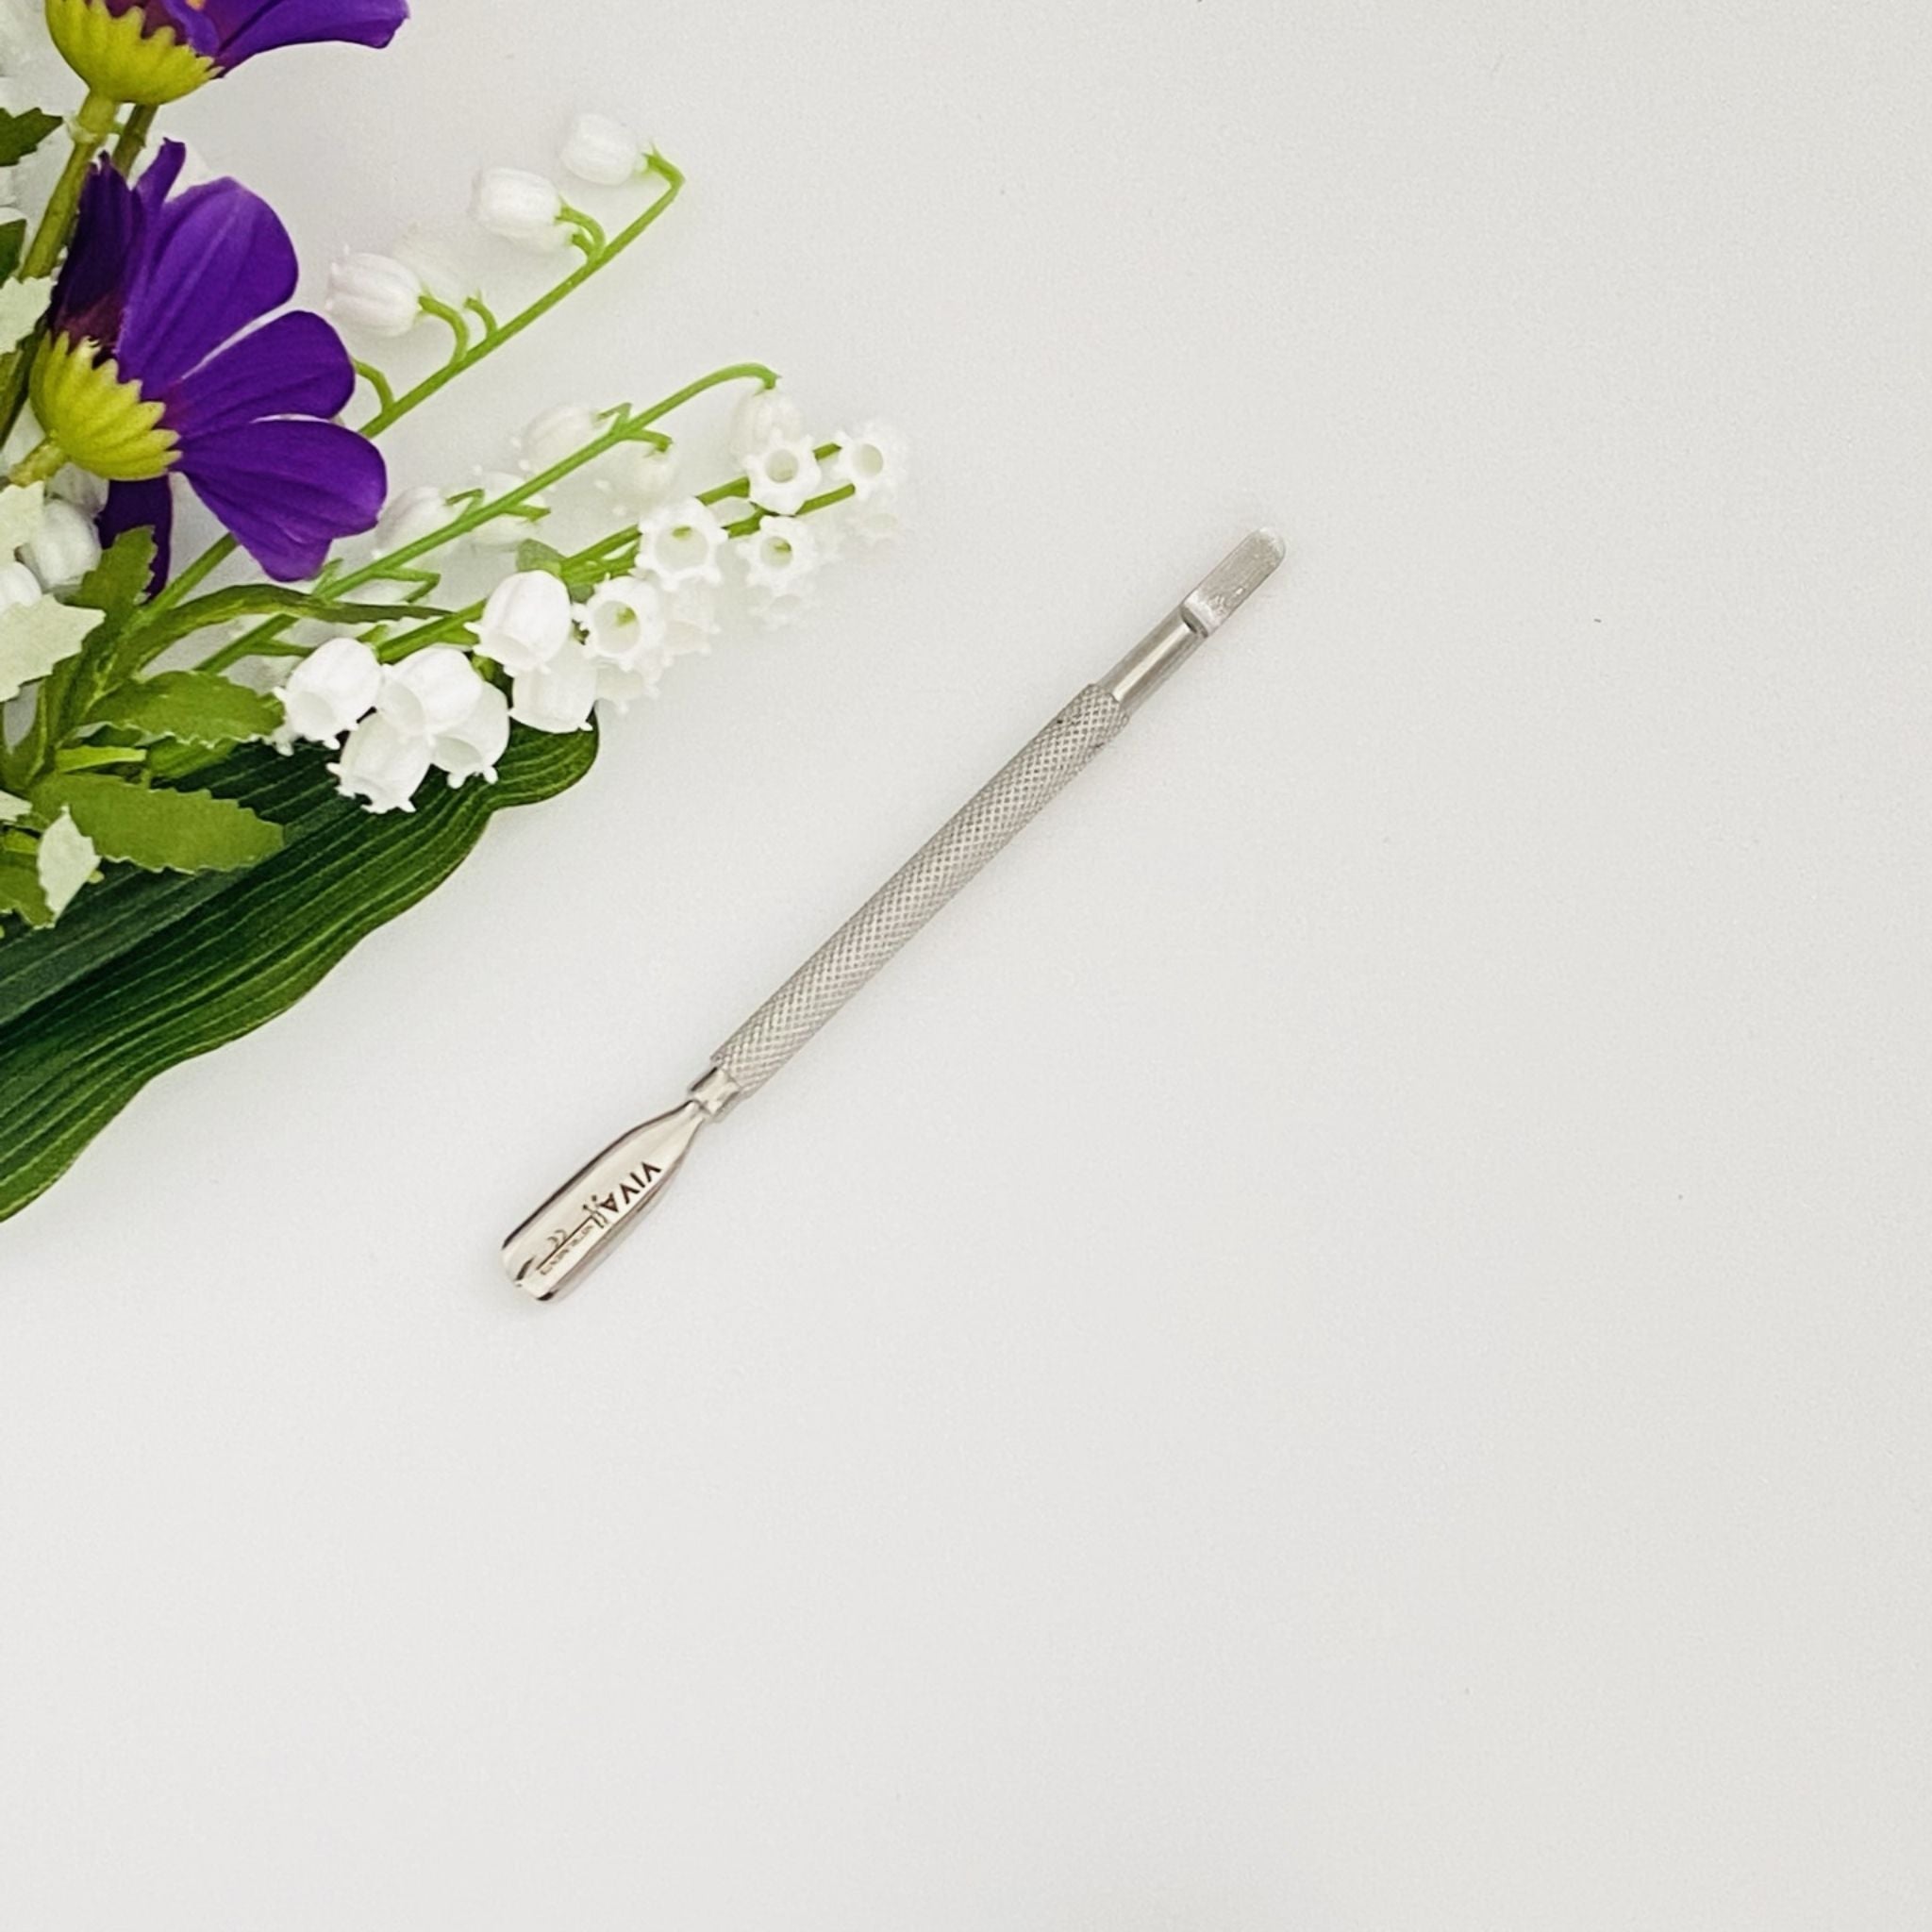 Manicure Tools - Cuticle Pusher Round End | Manicure Beauty Tools